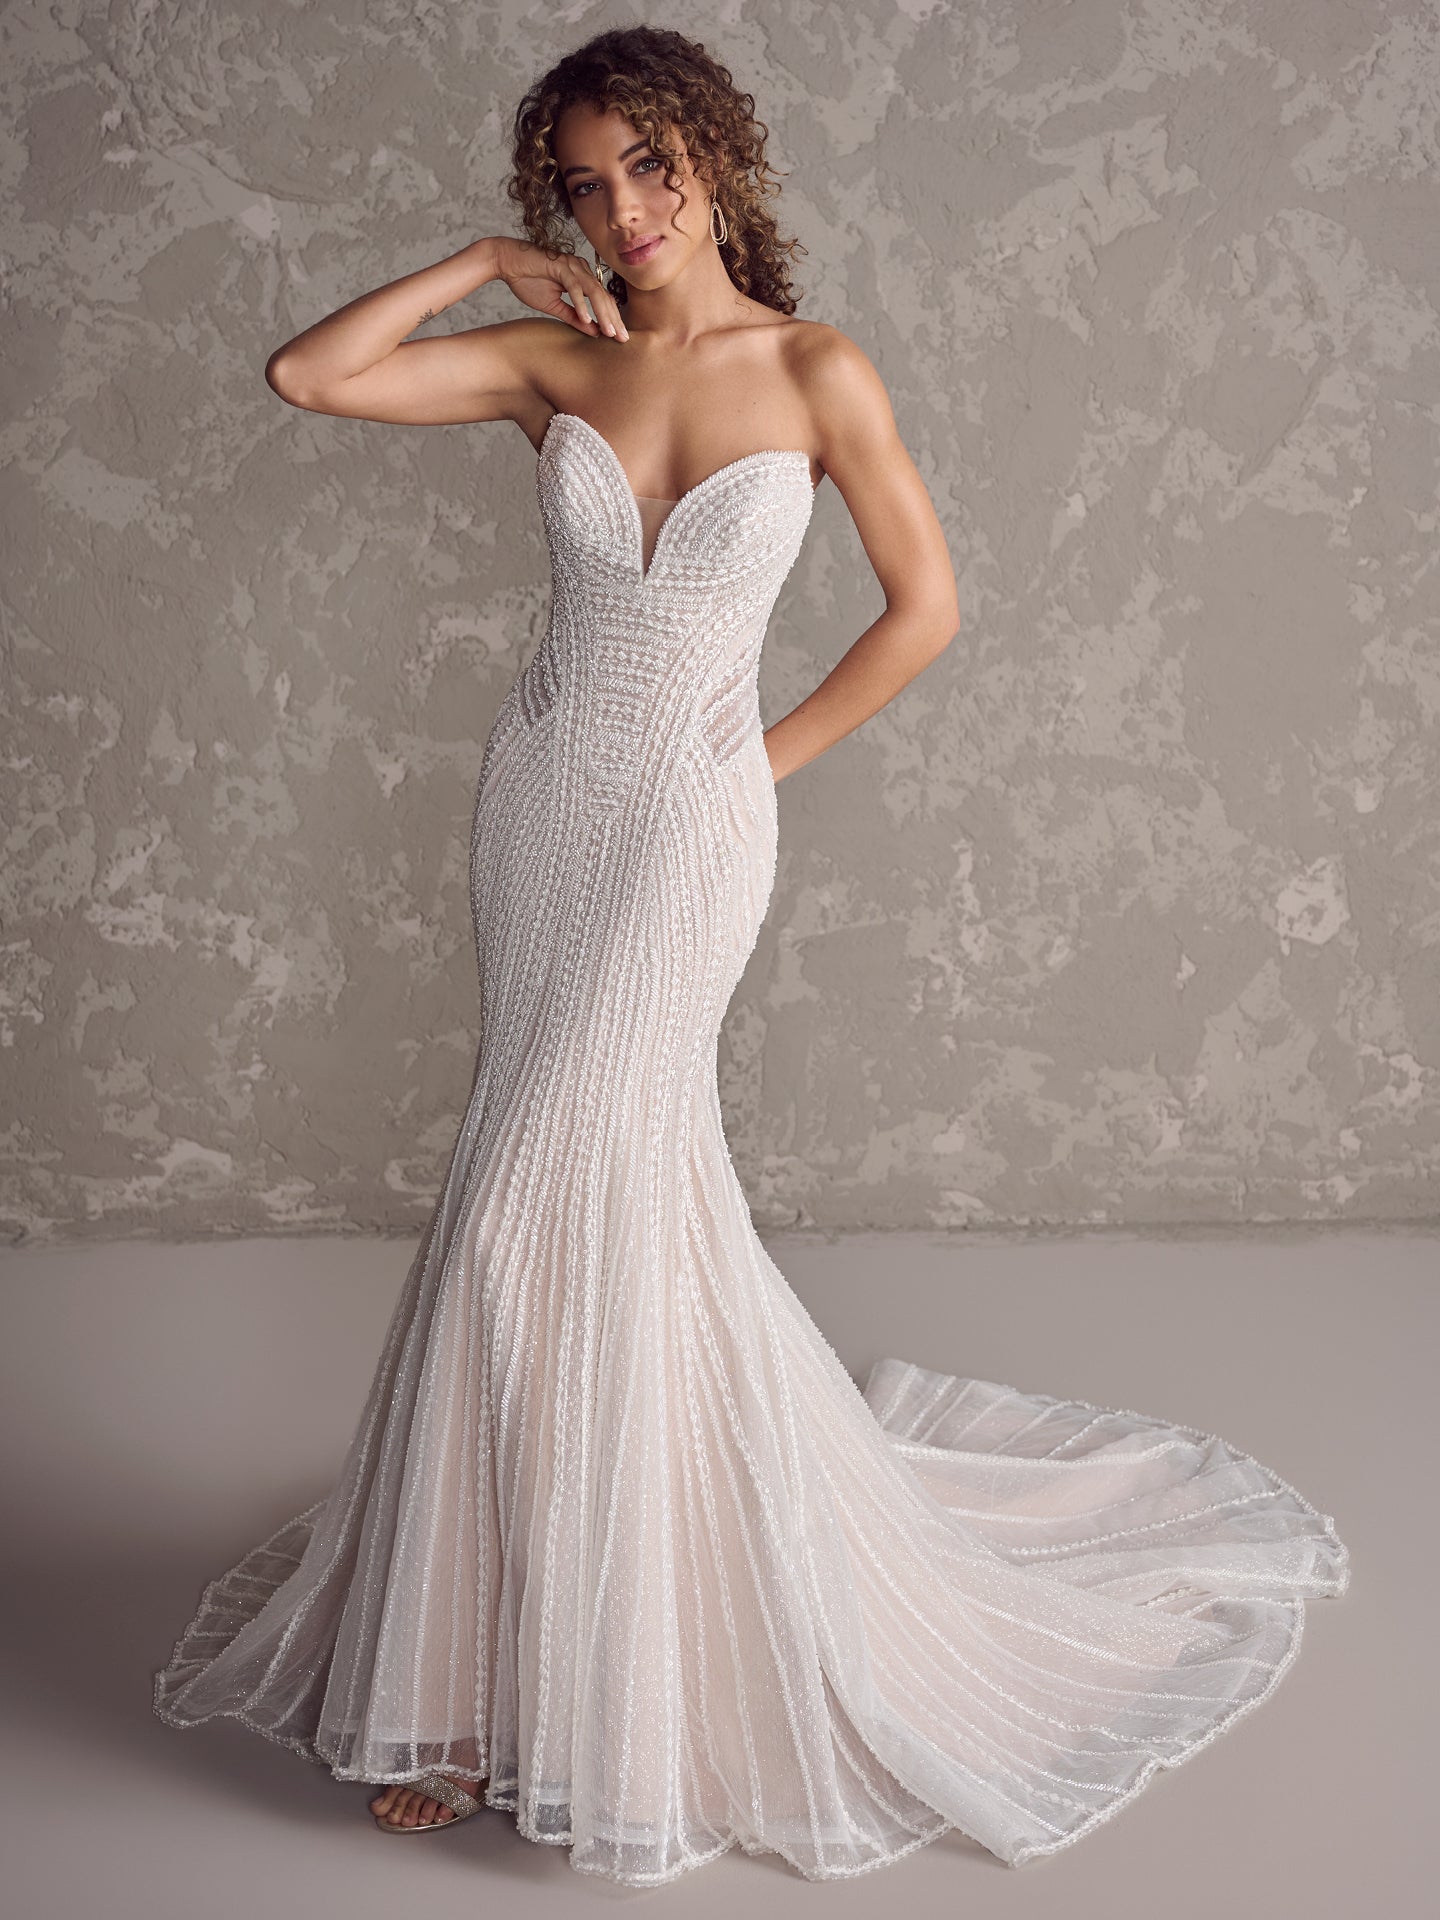 Strapless Beaded Fit-and-Flare Gown by Maggie Sottero - Image 1